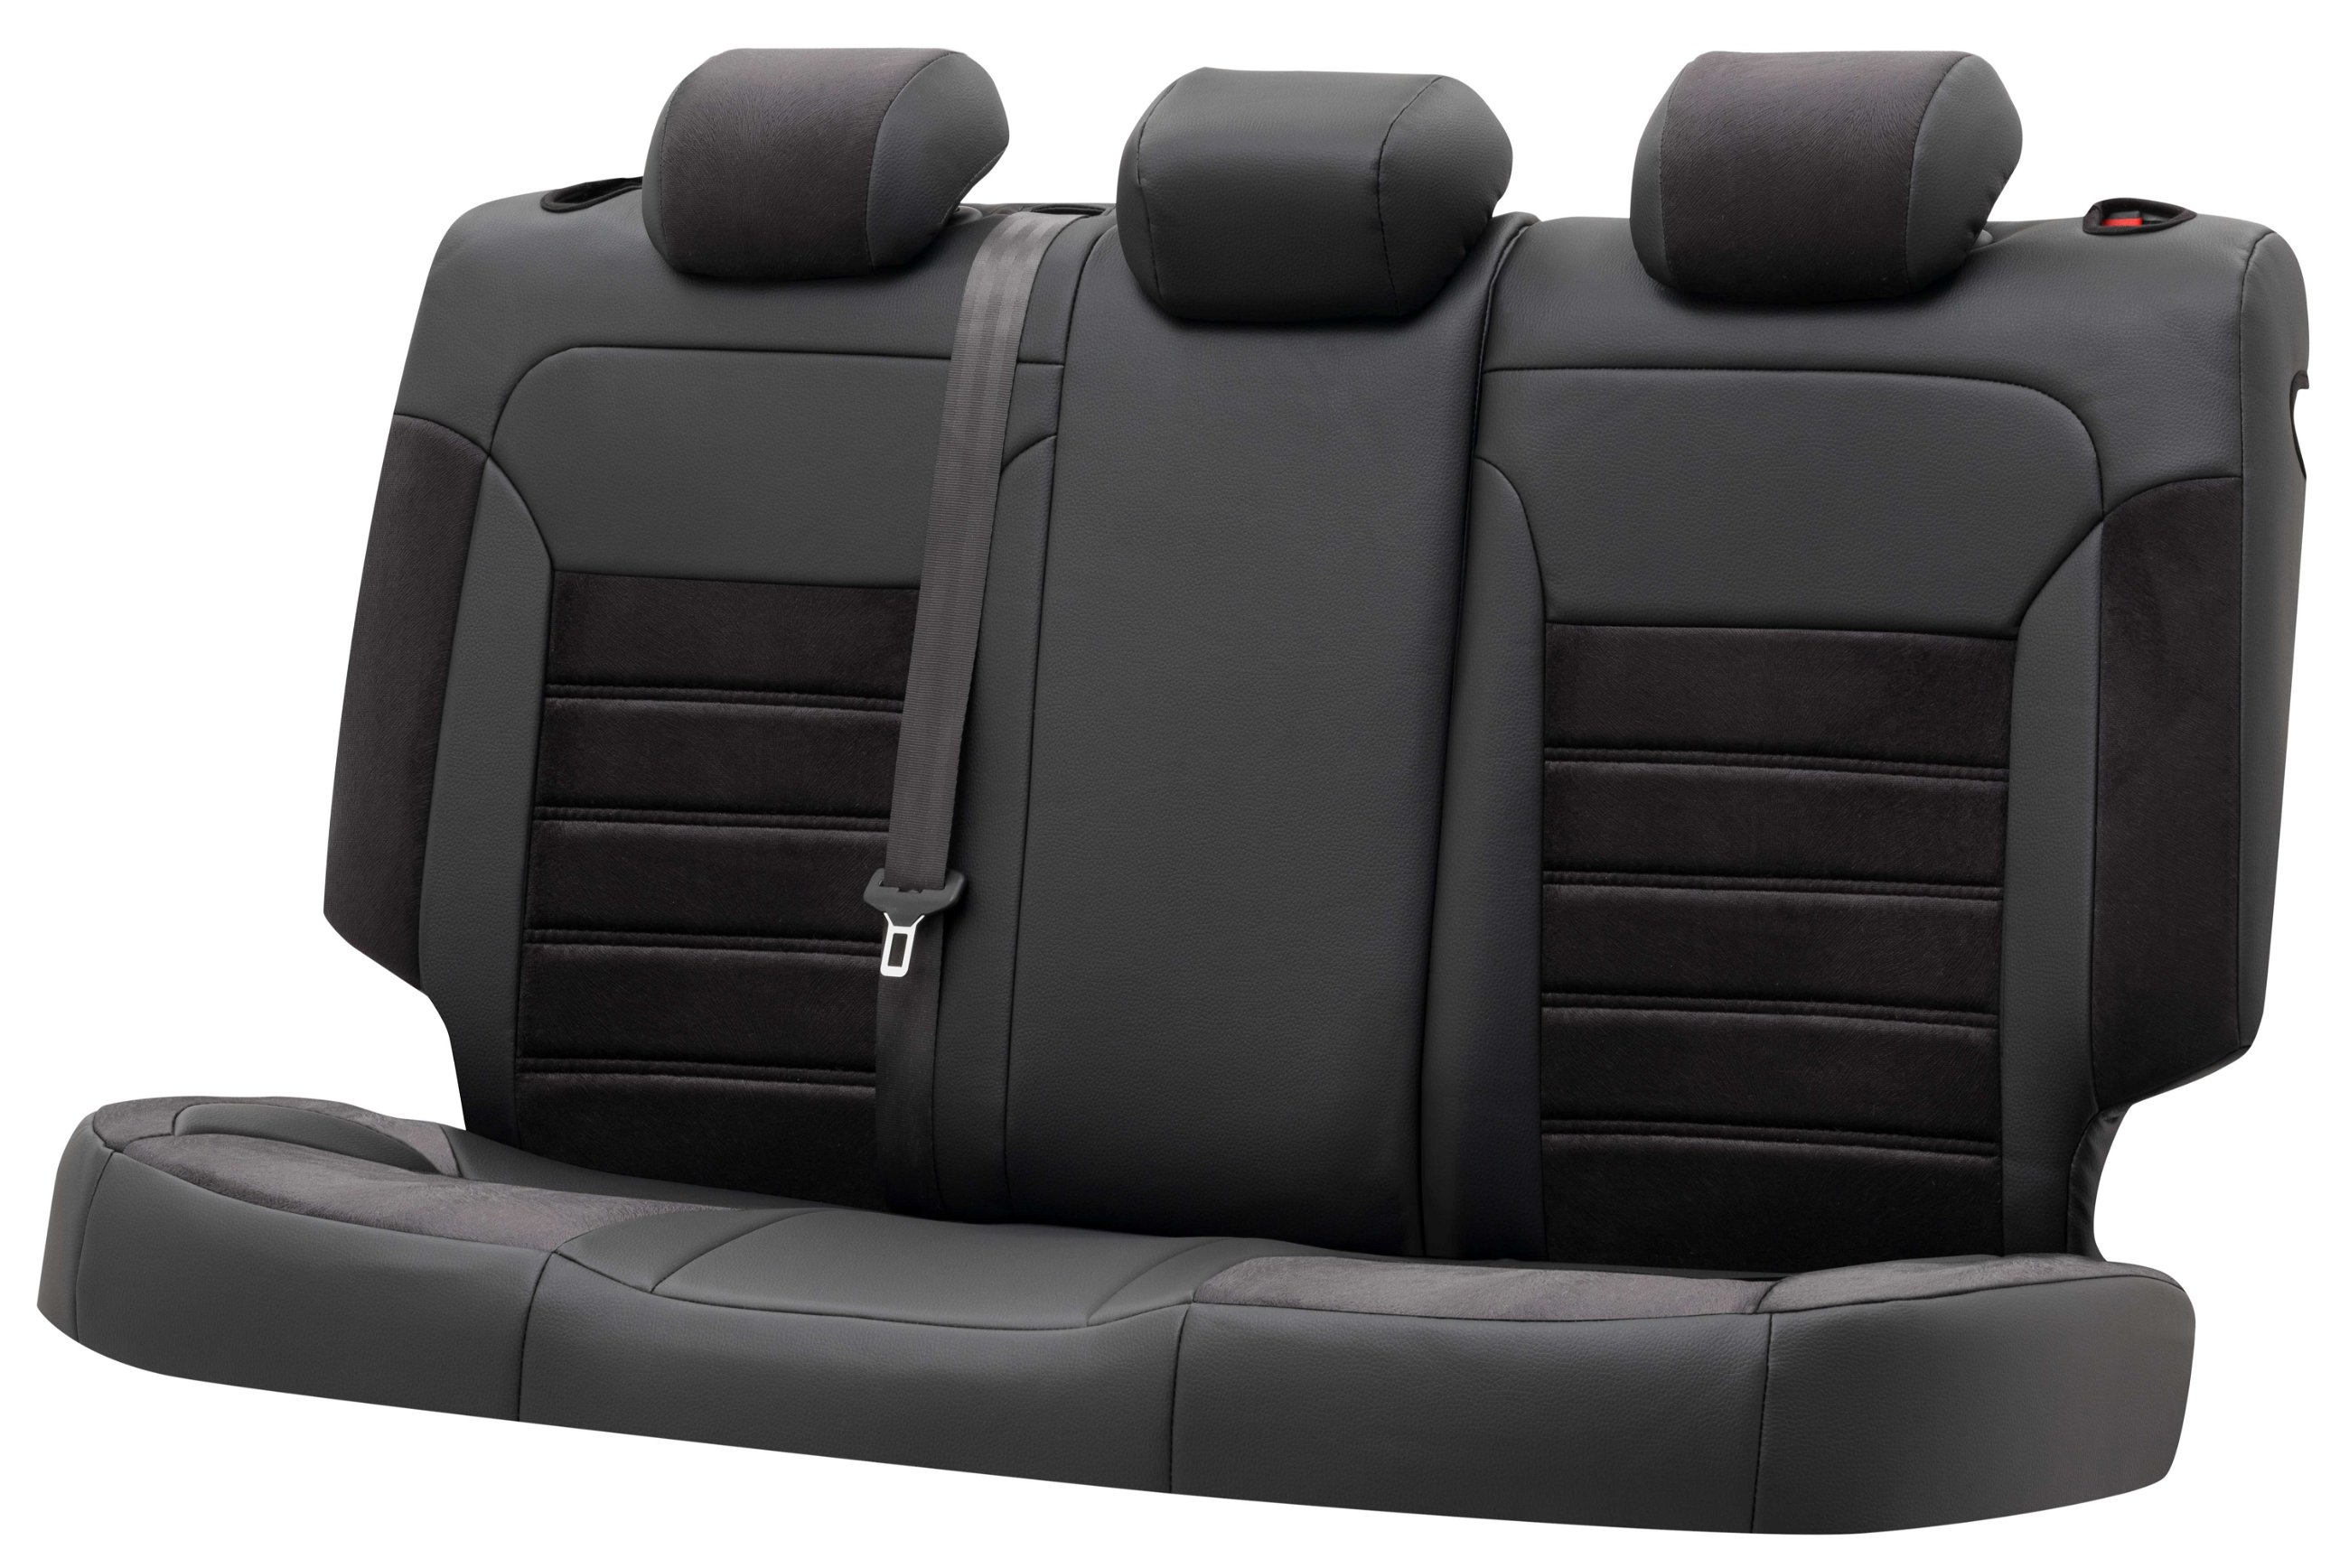 Seat Cover Bari for Ford Focus II Turnier 07/2004-09/2012, 1 rear seat cover for normal seats